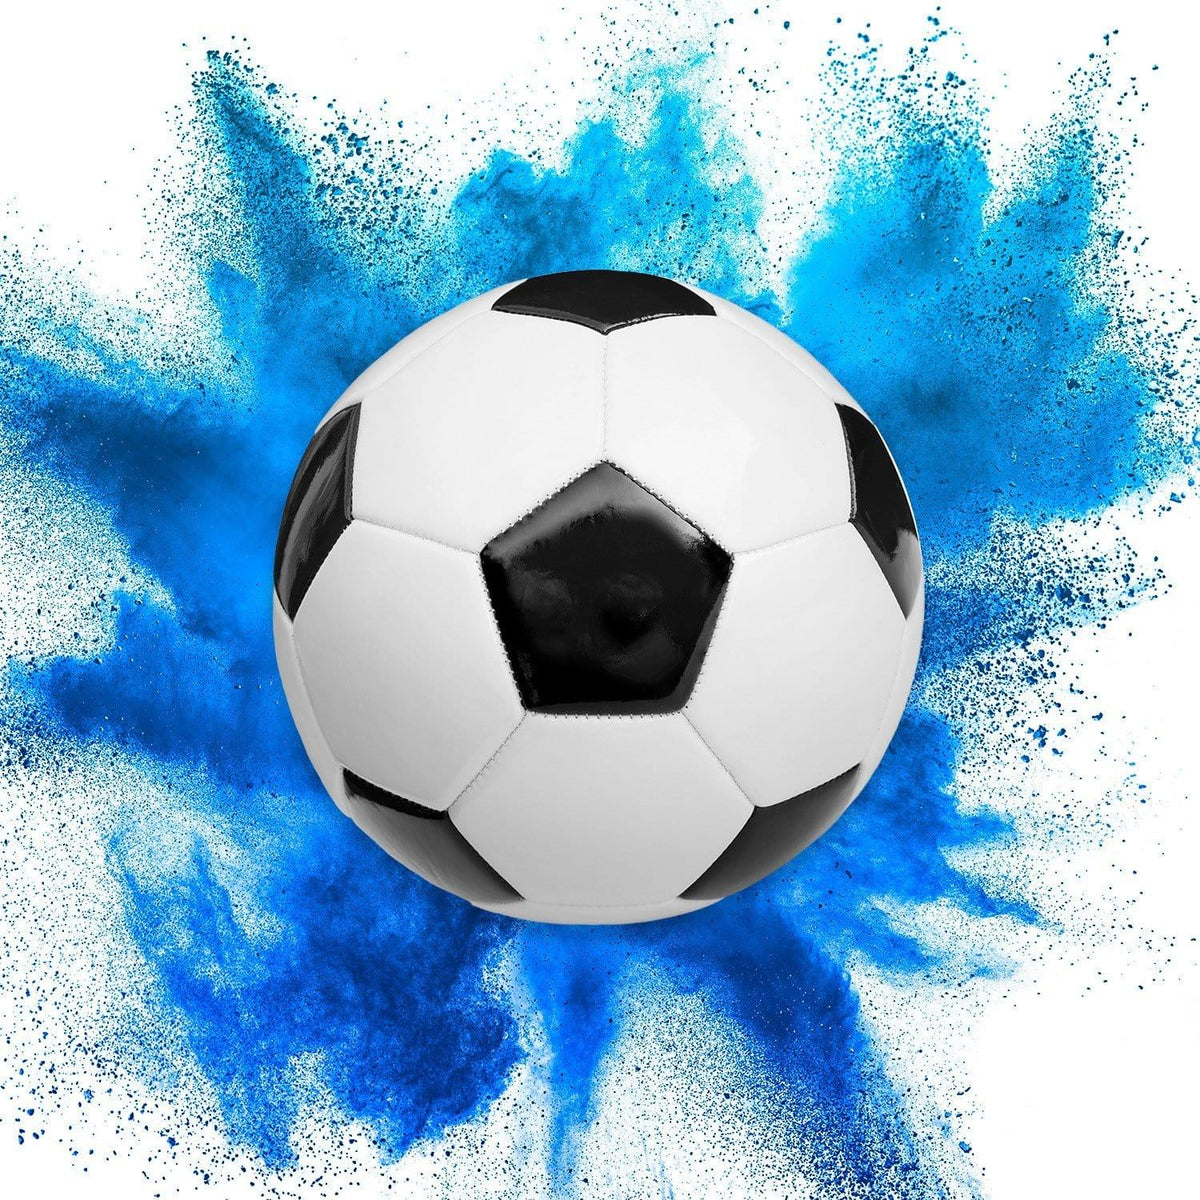 Buy Baby Shower Gender Reveal Soccer Ball - Blue sold at Party Expert